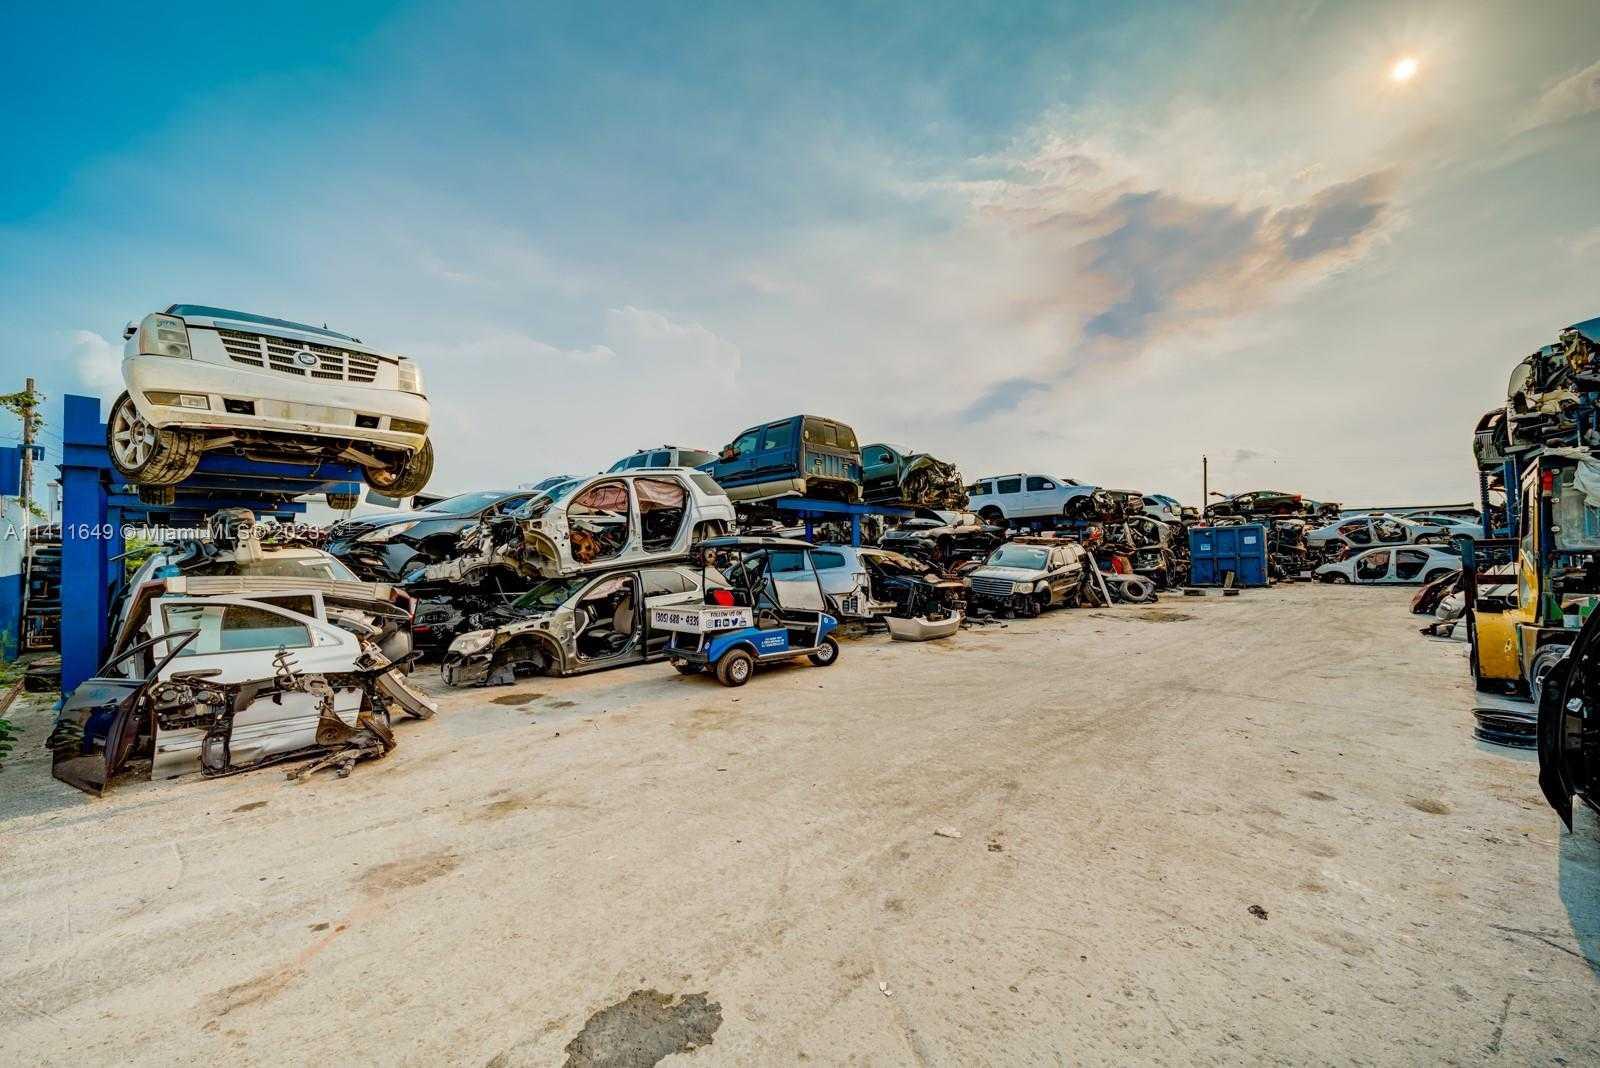 2 2 Junkyards For Sale in South Florida with the Real Estate Included, Miami, Automotive,  for sale, Sandra Benkahla, The 305 Agency